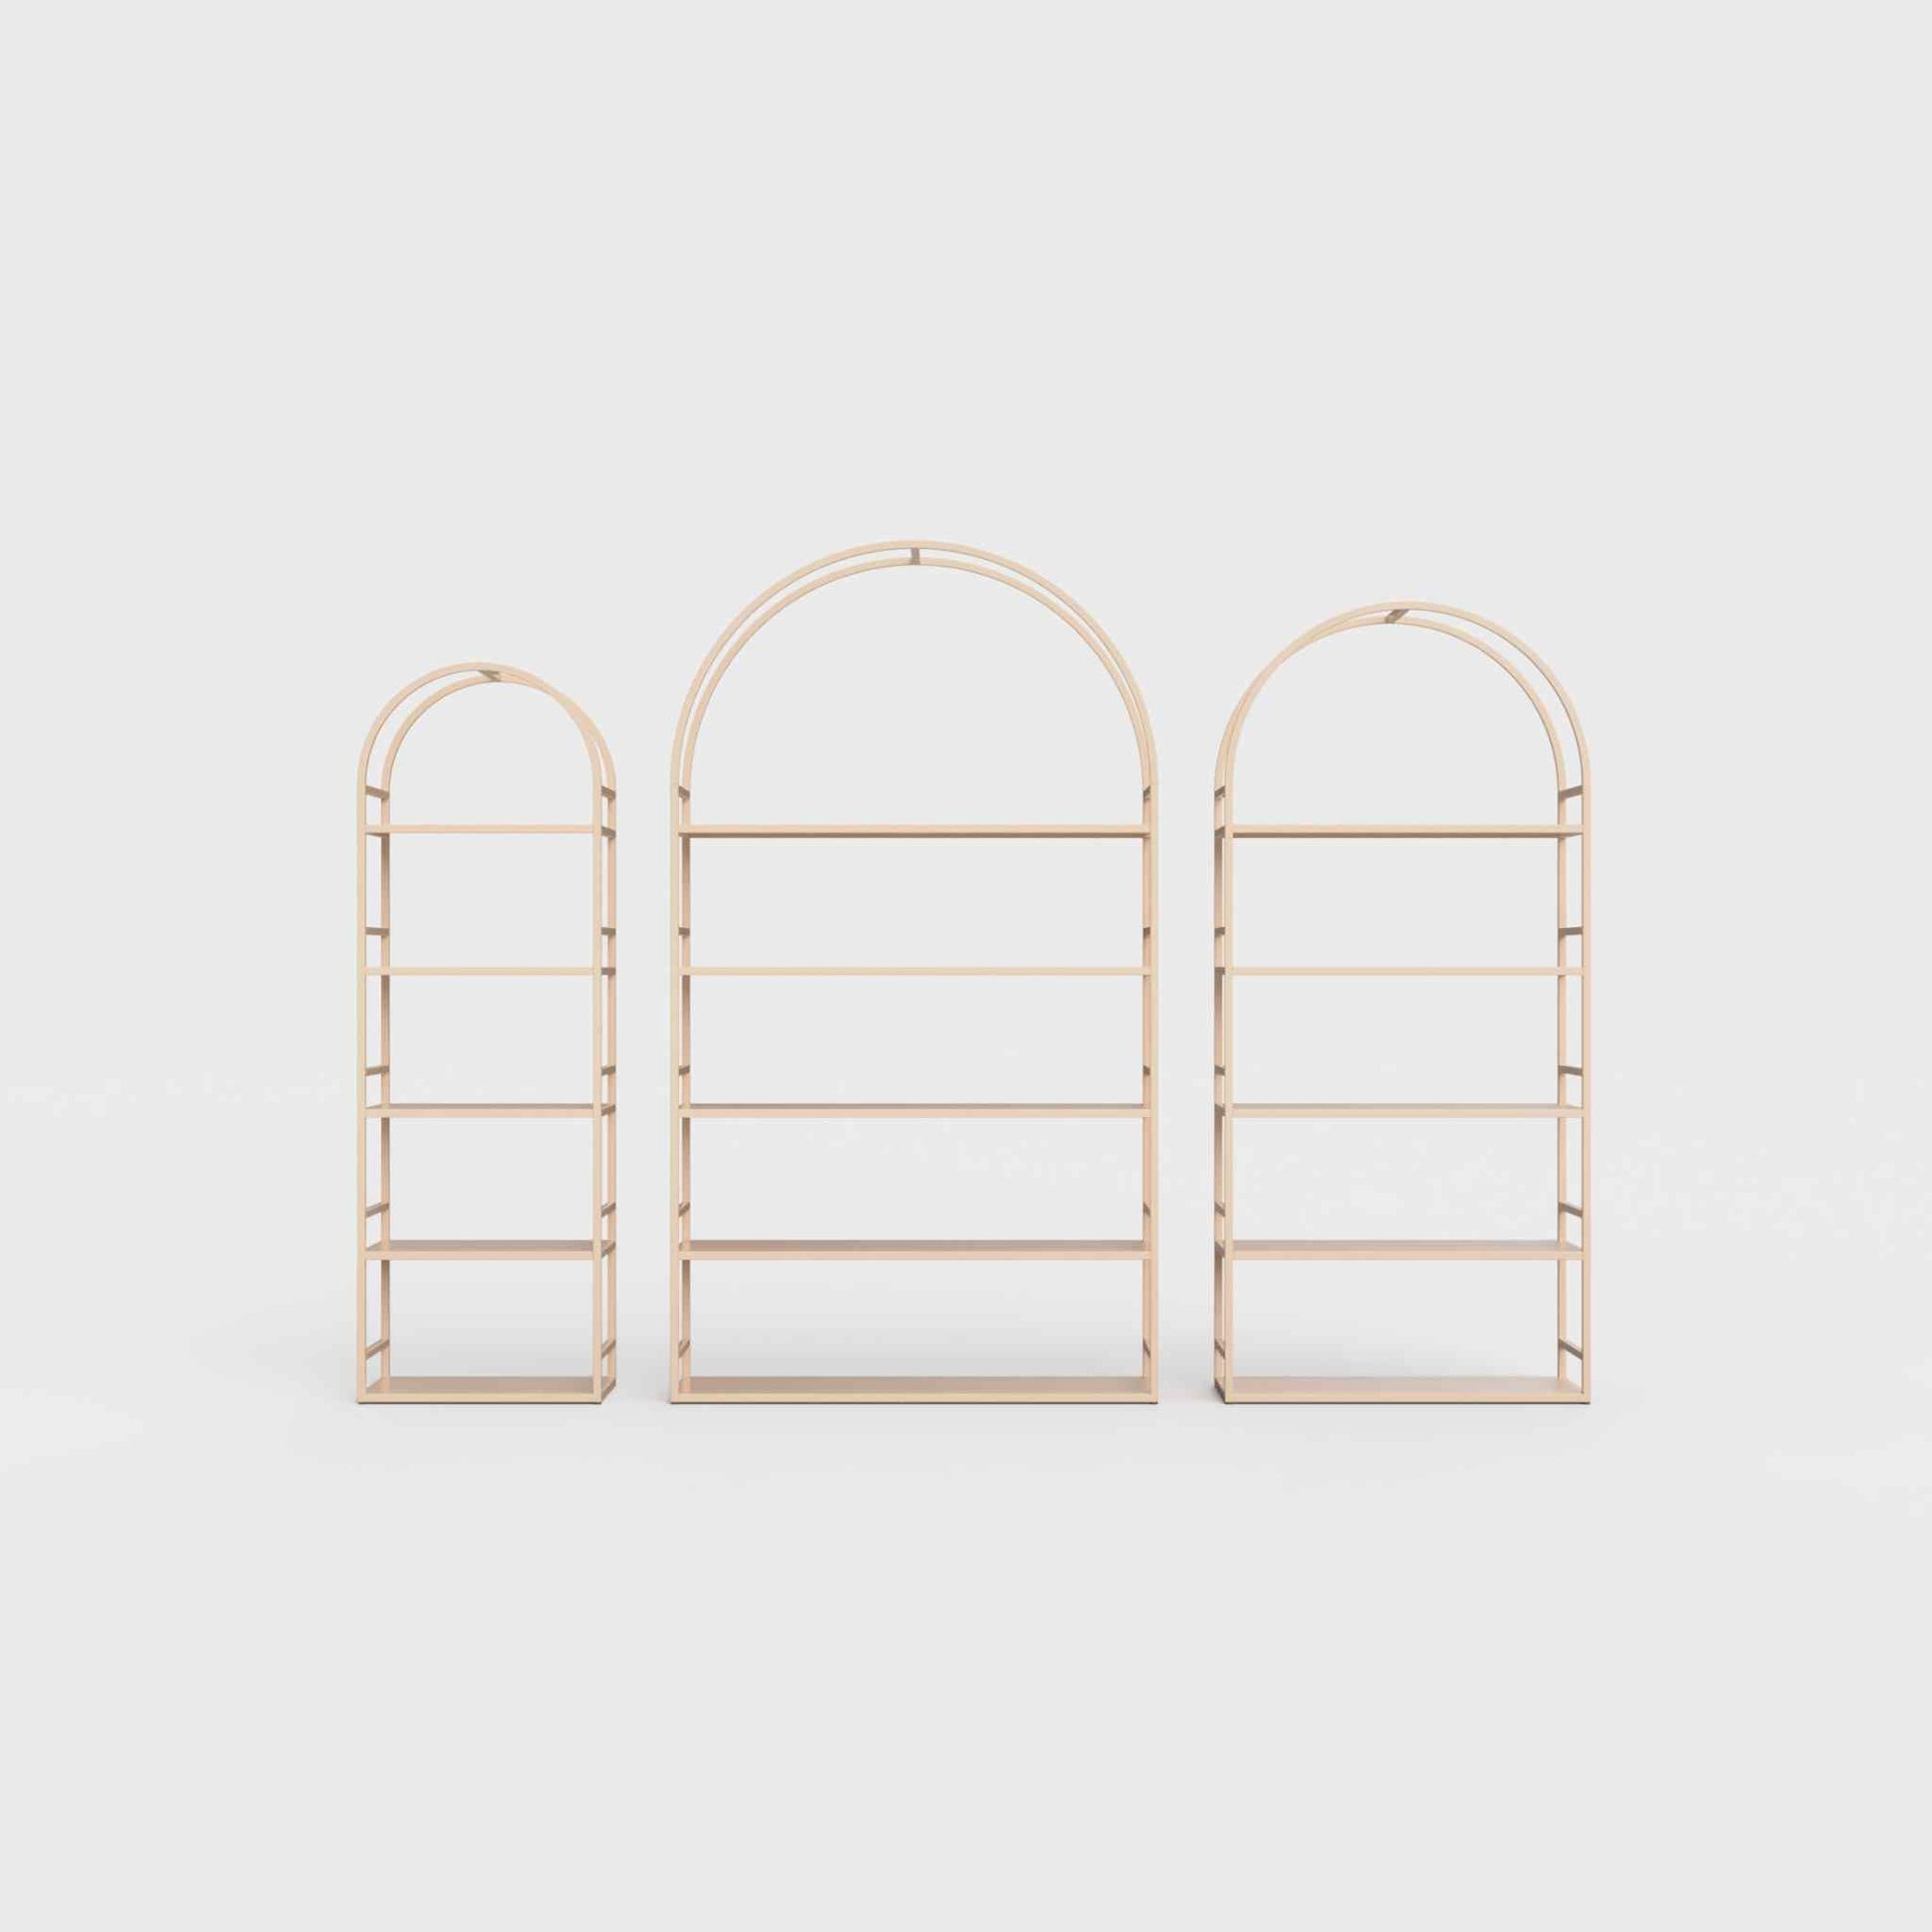 Arched bookcase Arkada, available in Switzerland through ÉTAUDORÉ, made from highest quality powdered coated steel in pastel salmon color